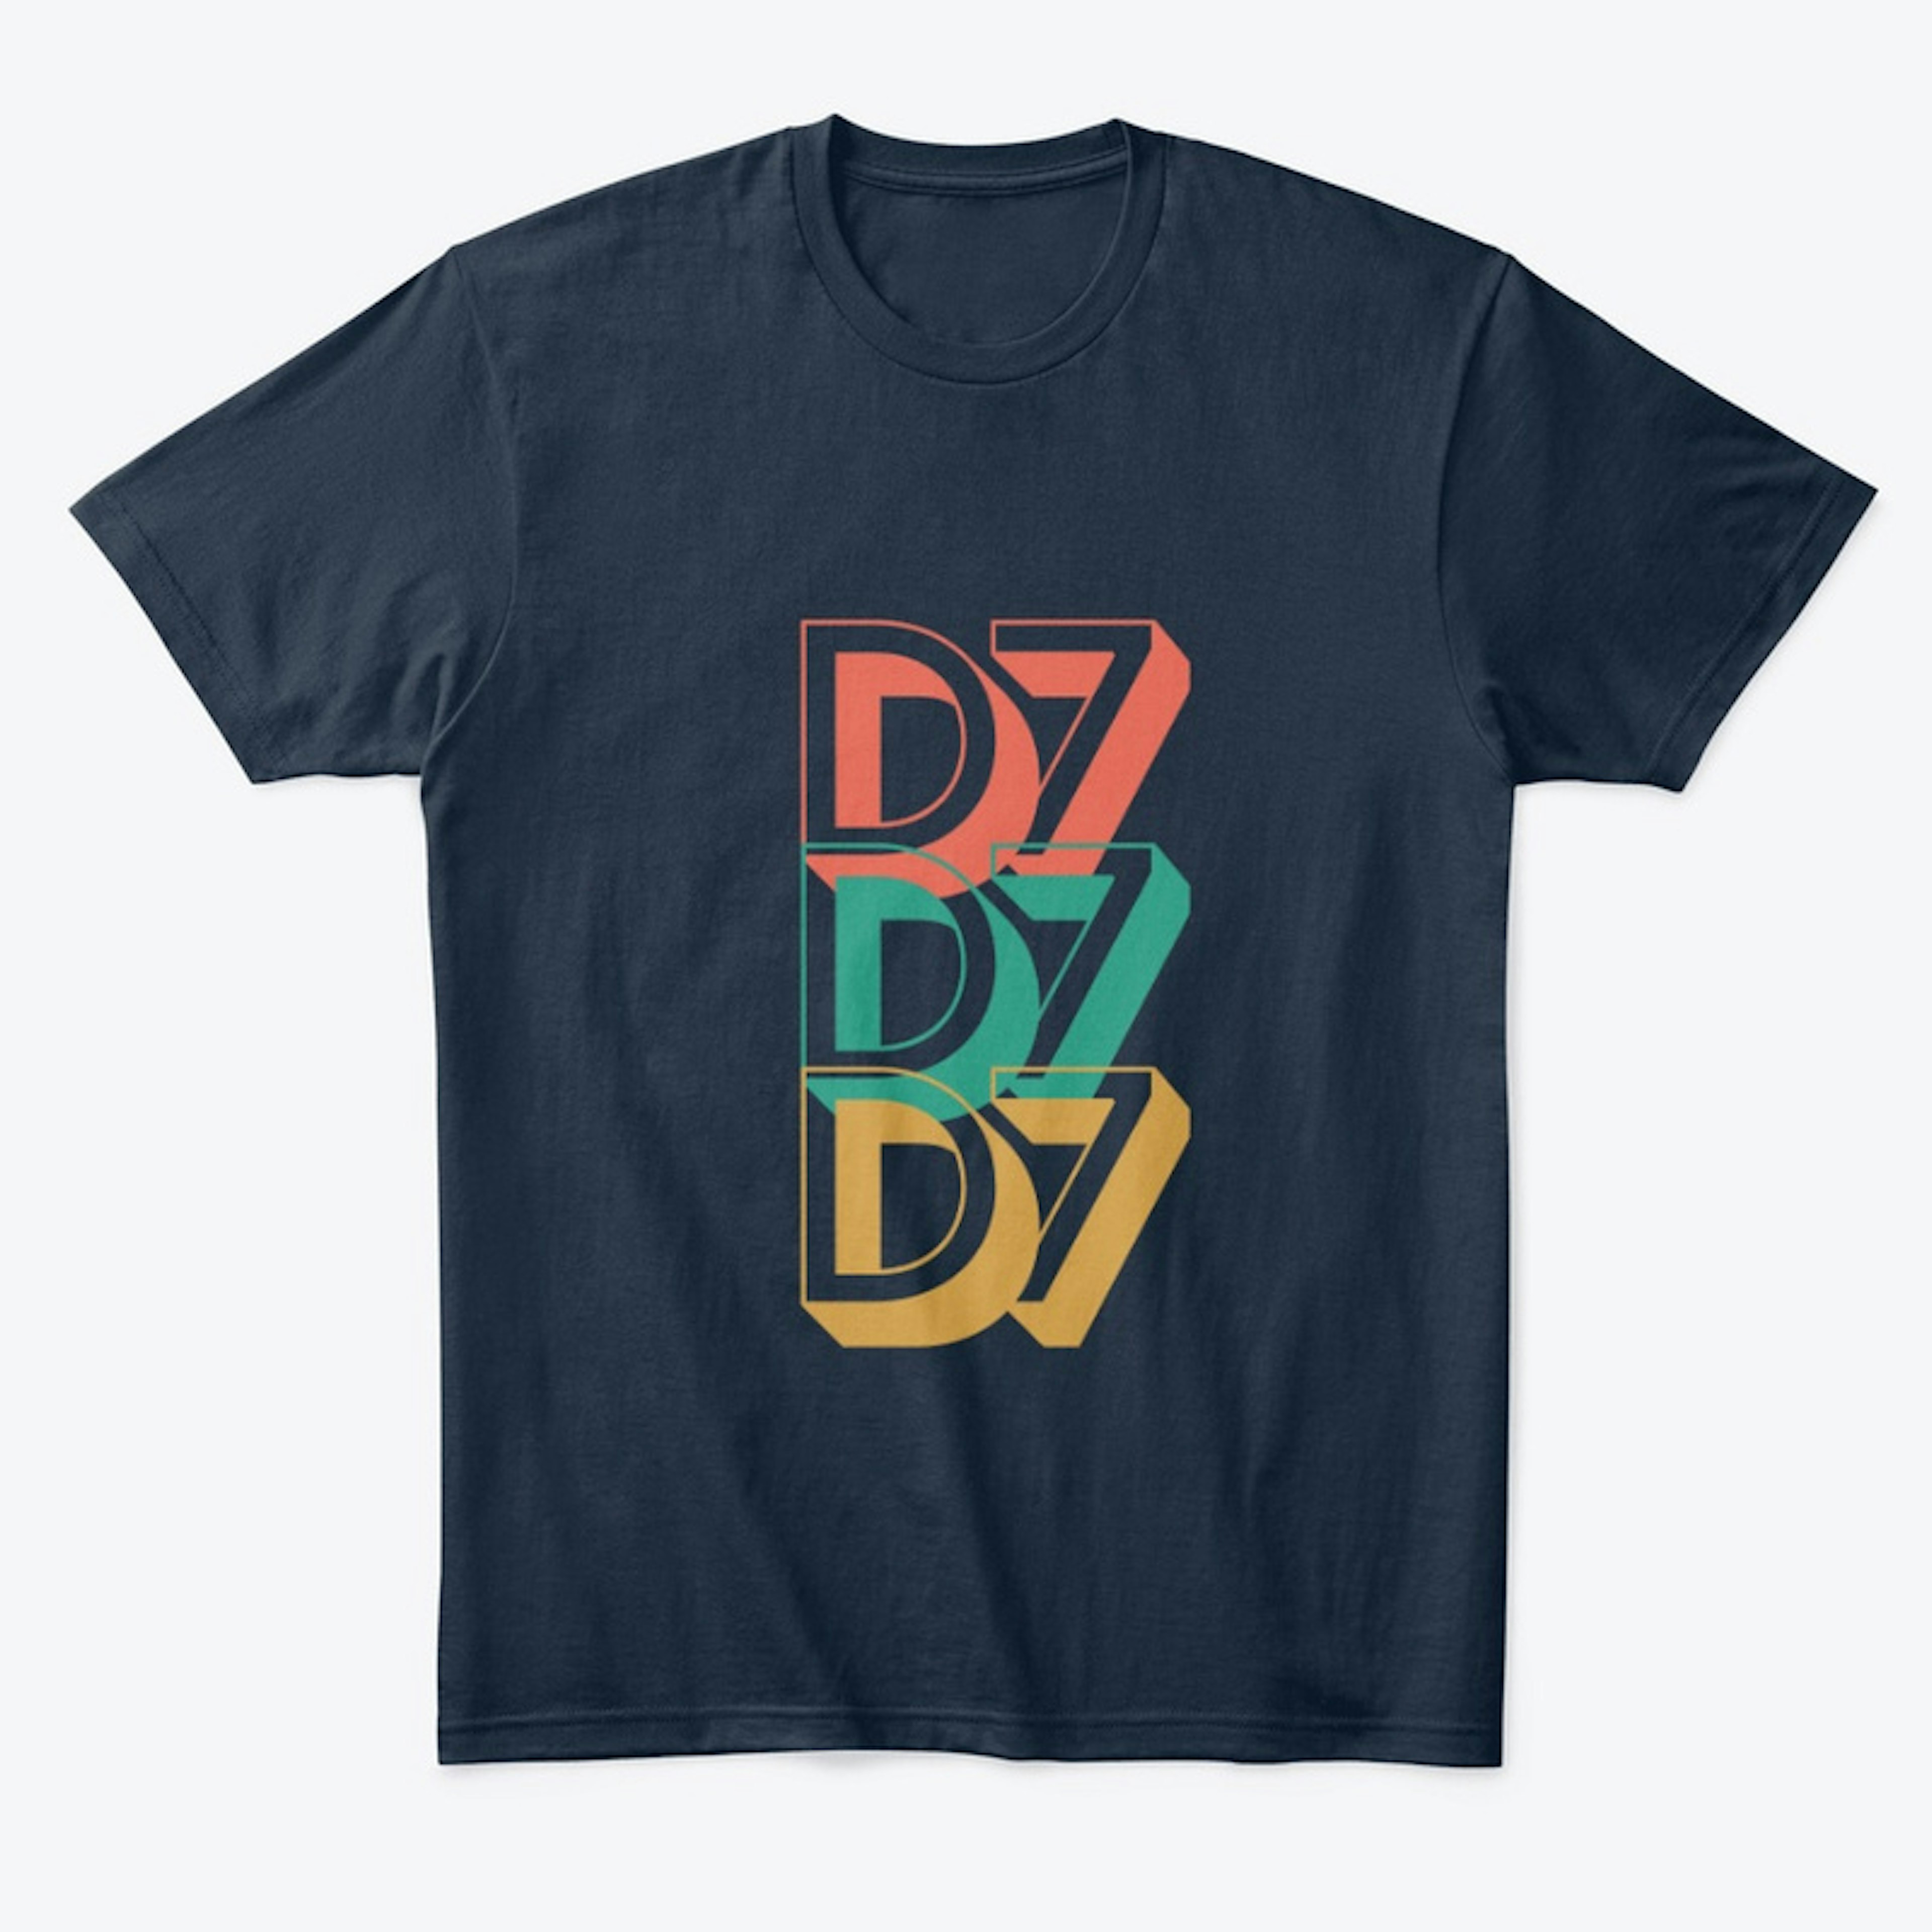 D7 TSHIRT AND GEAR